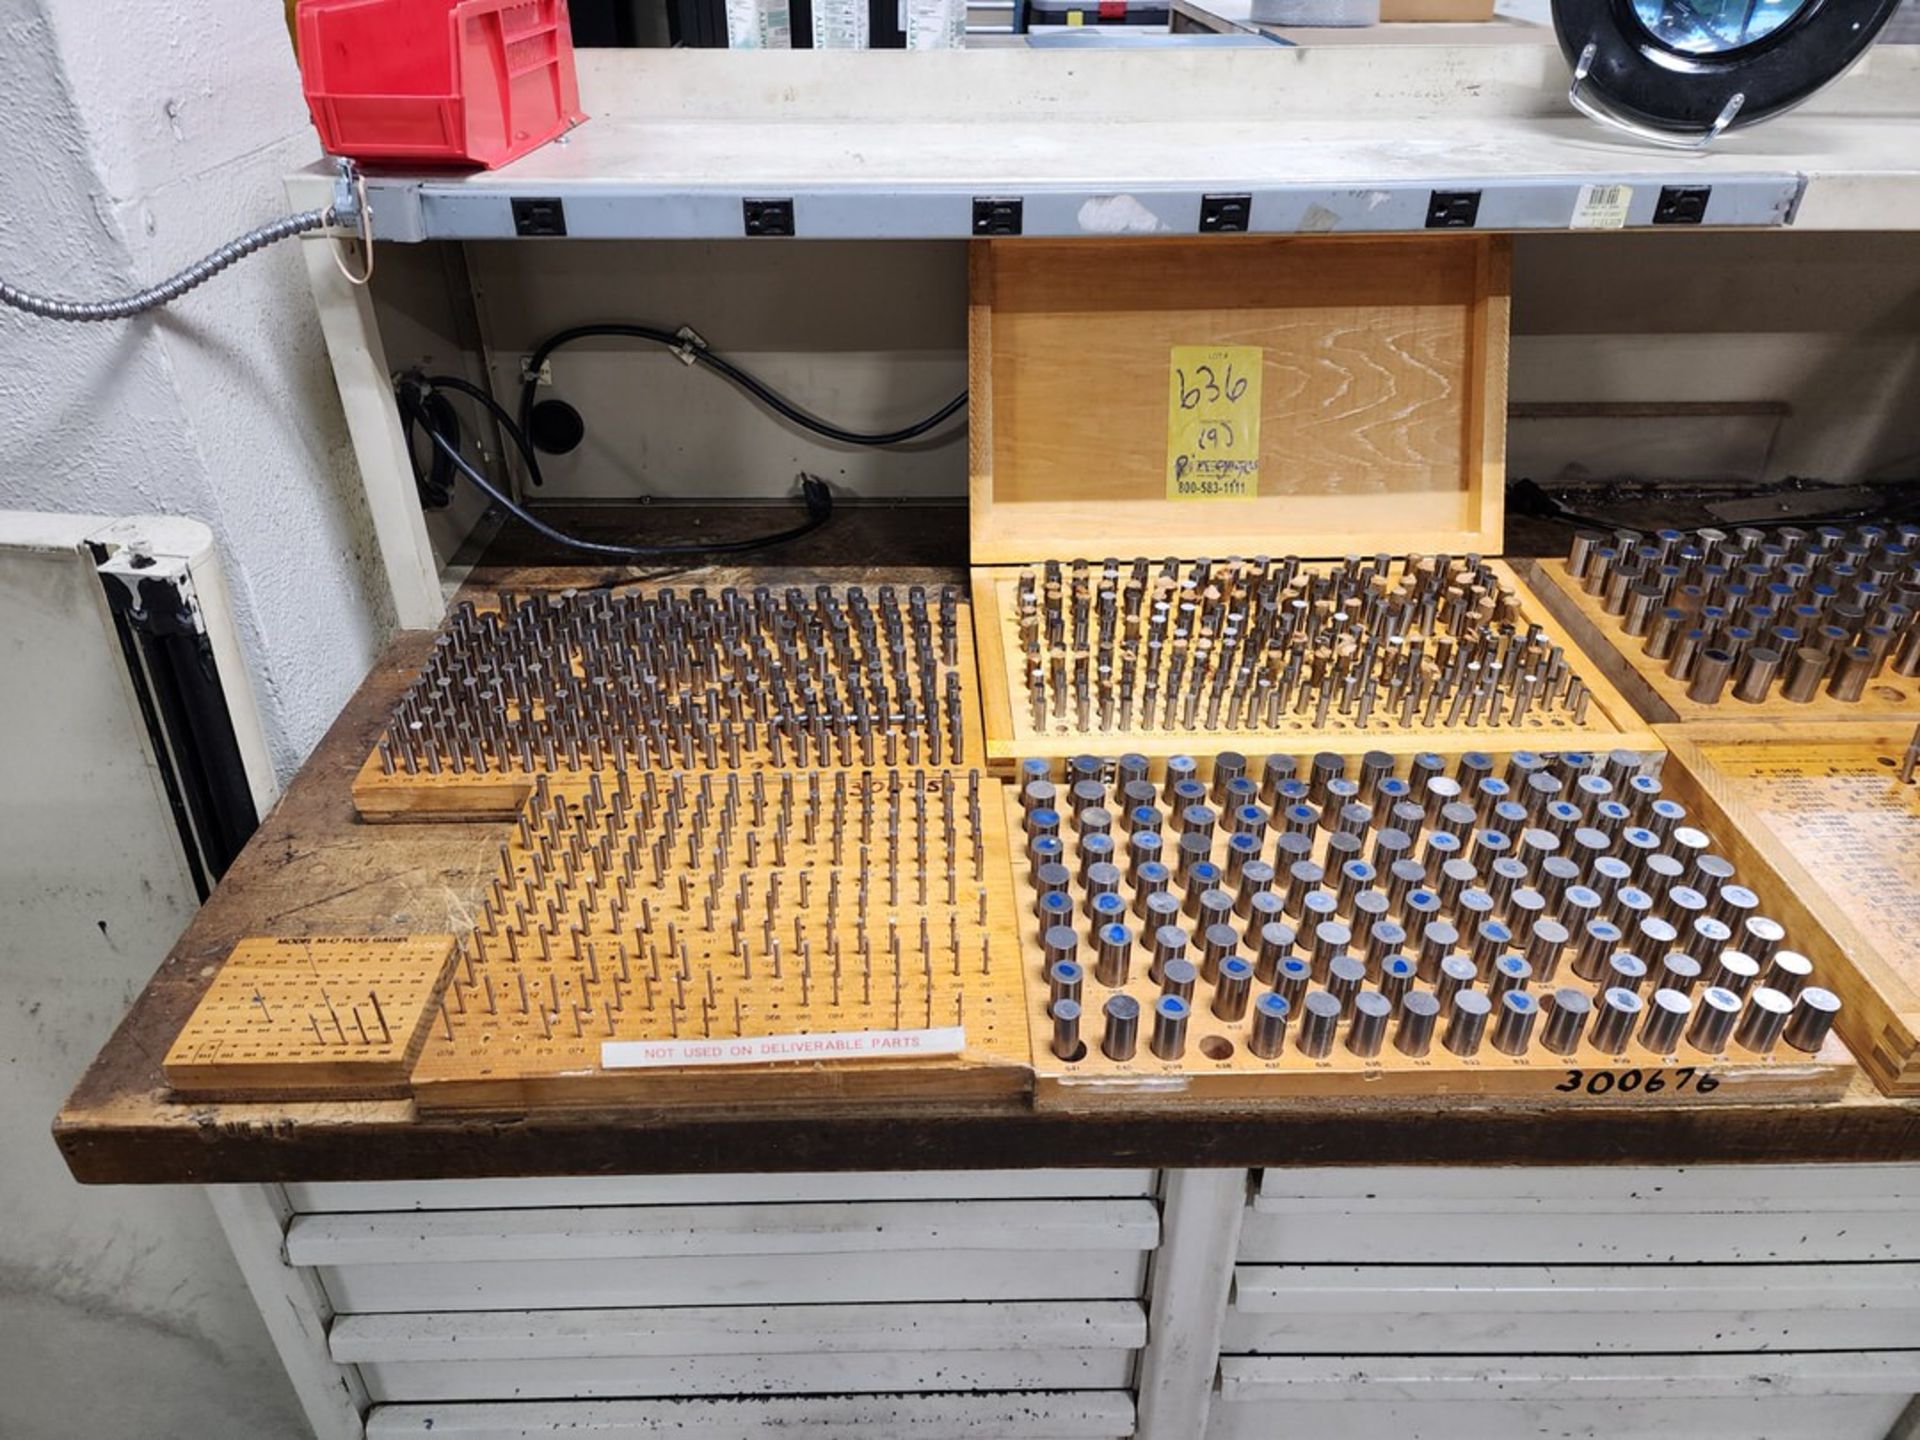 (9) Assorted Pin Gage Sets